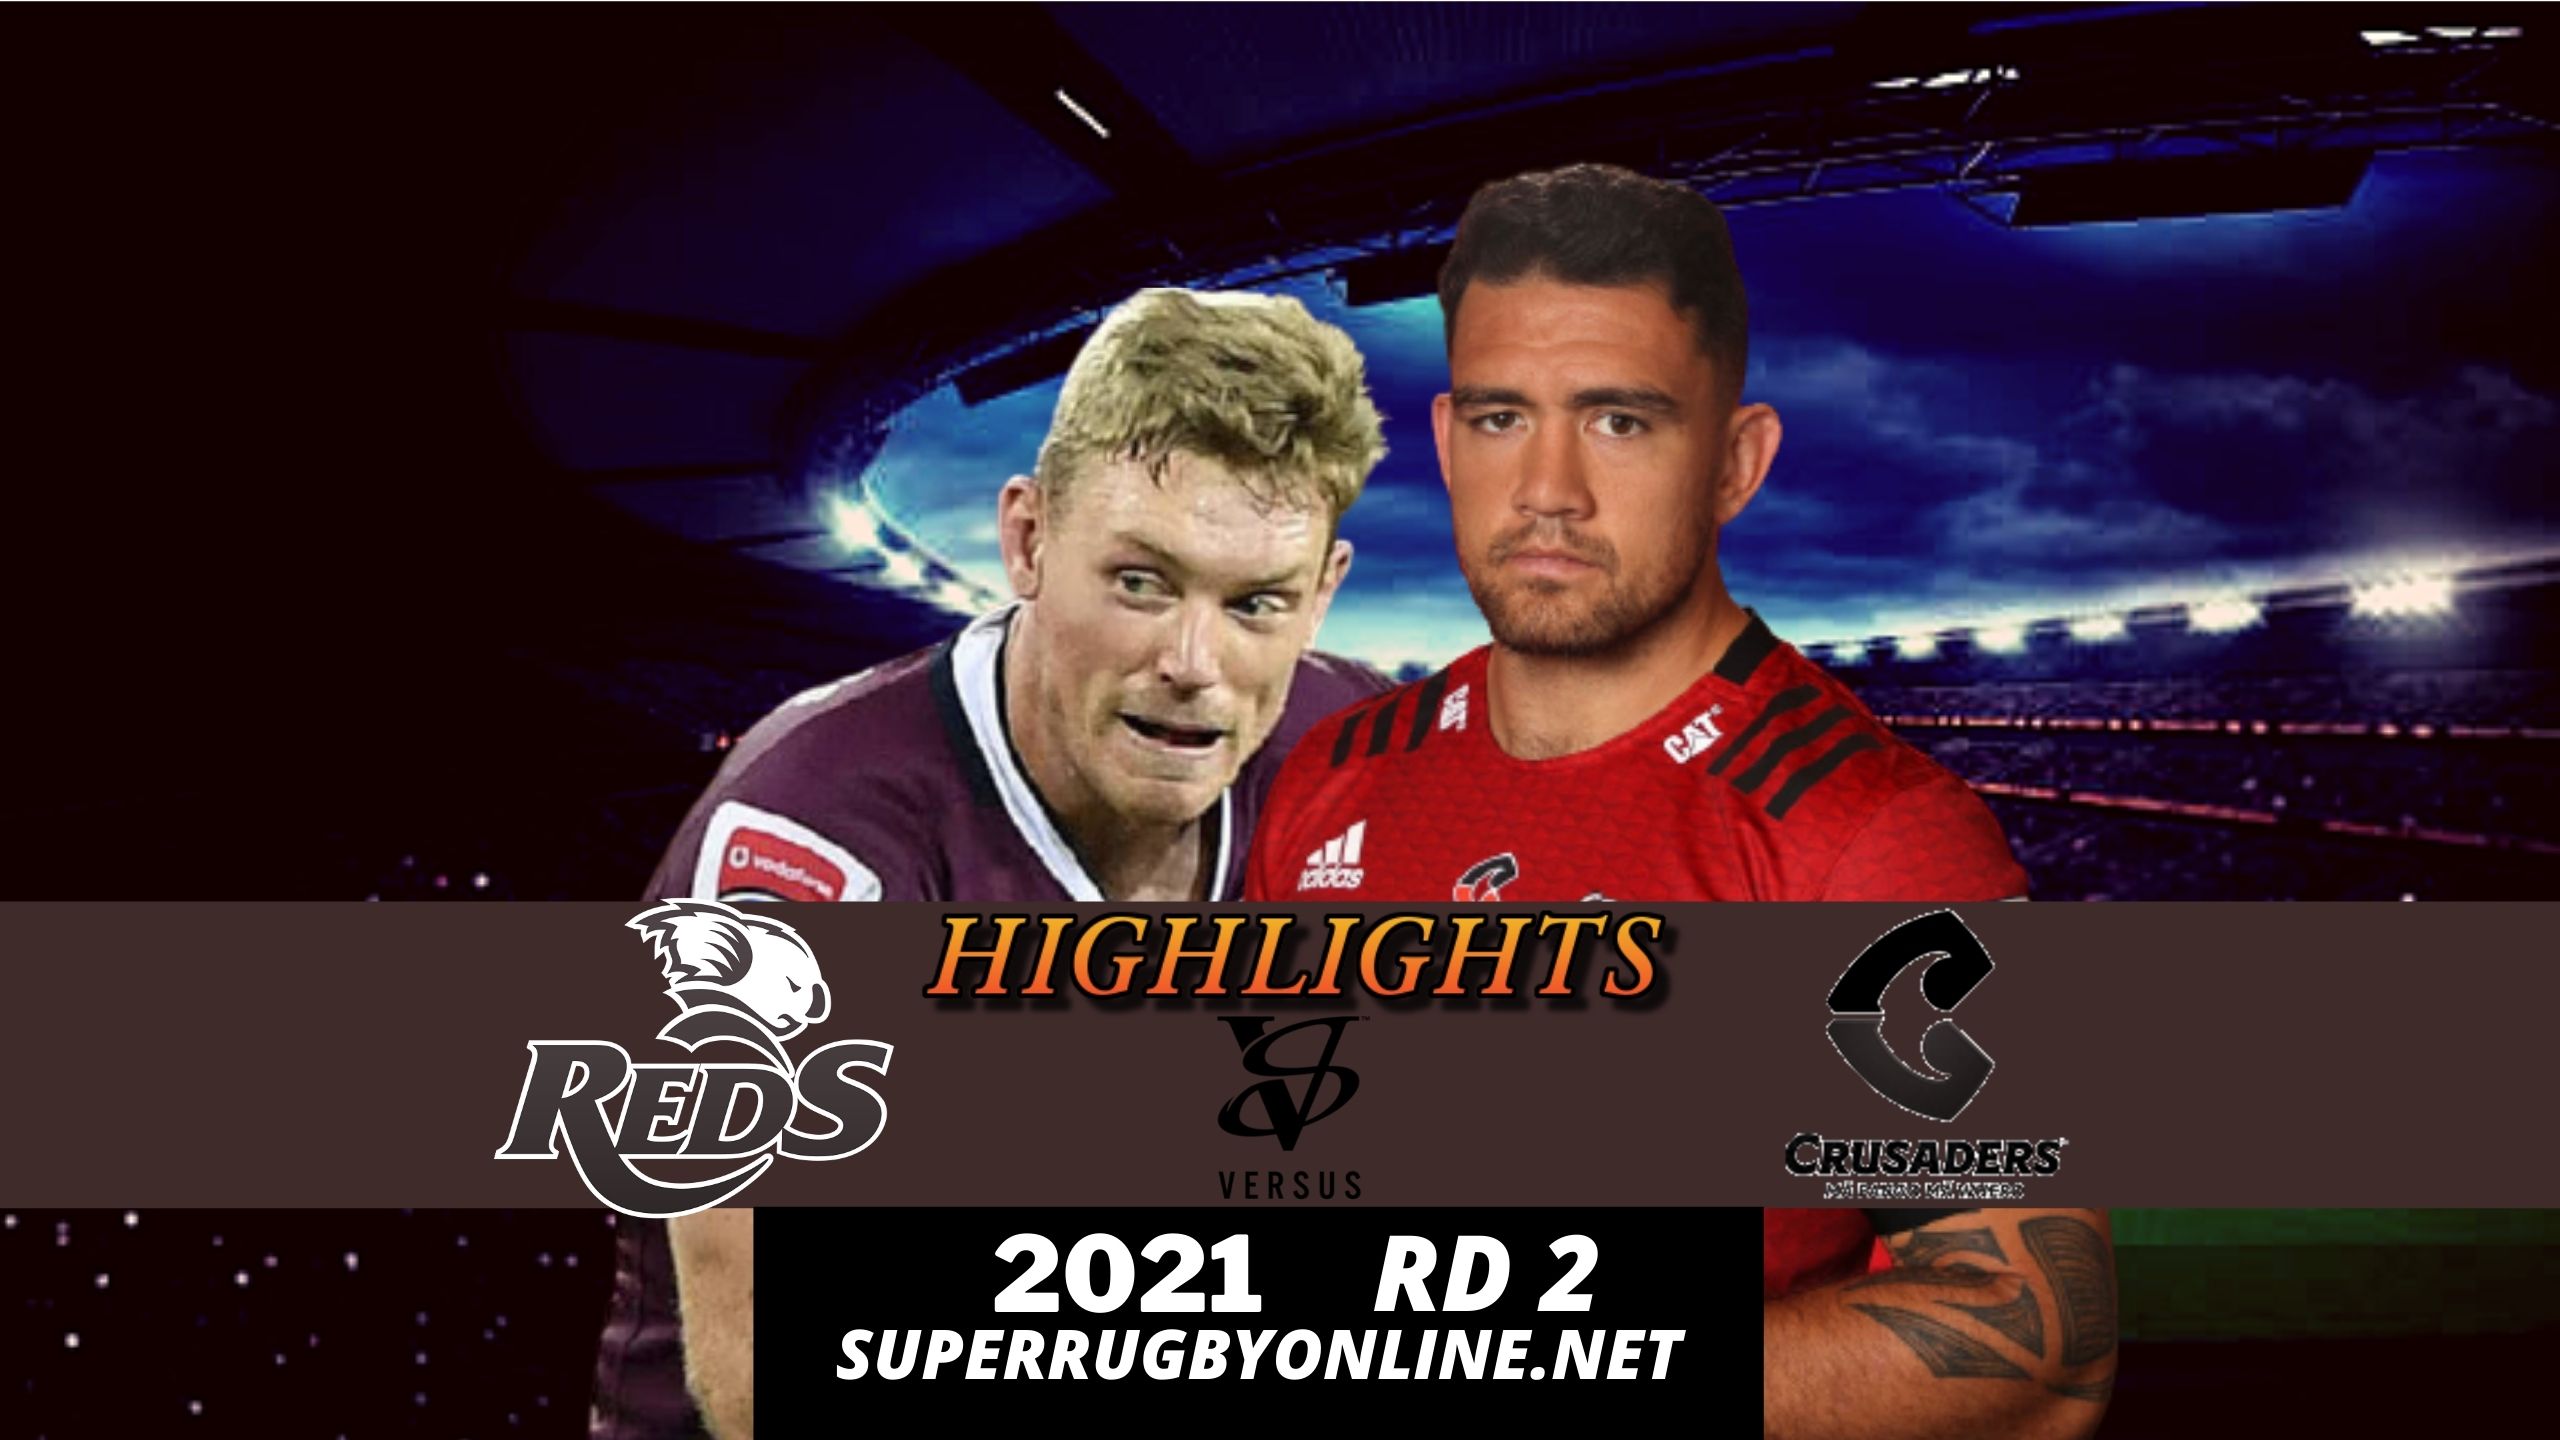 Reds Vs Crusaders Highlights 2021